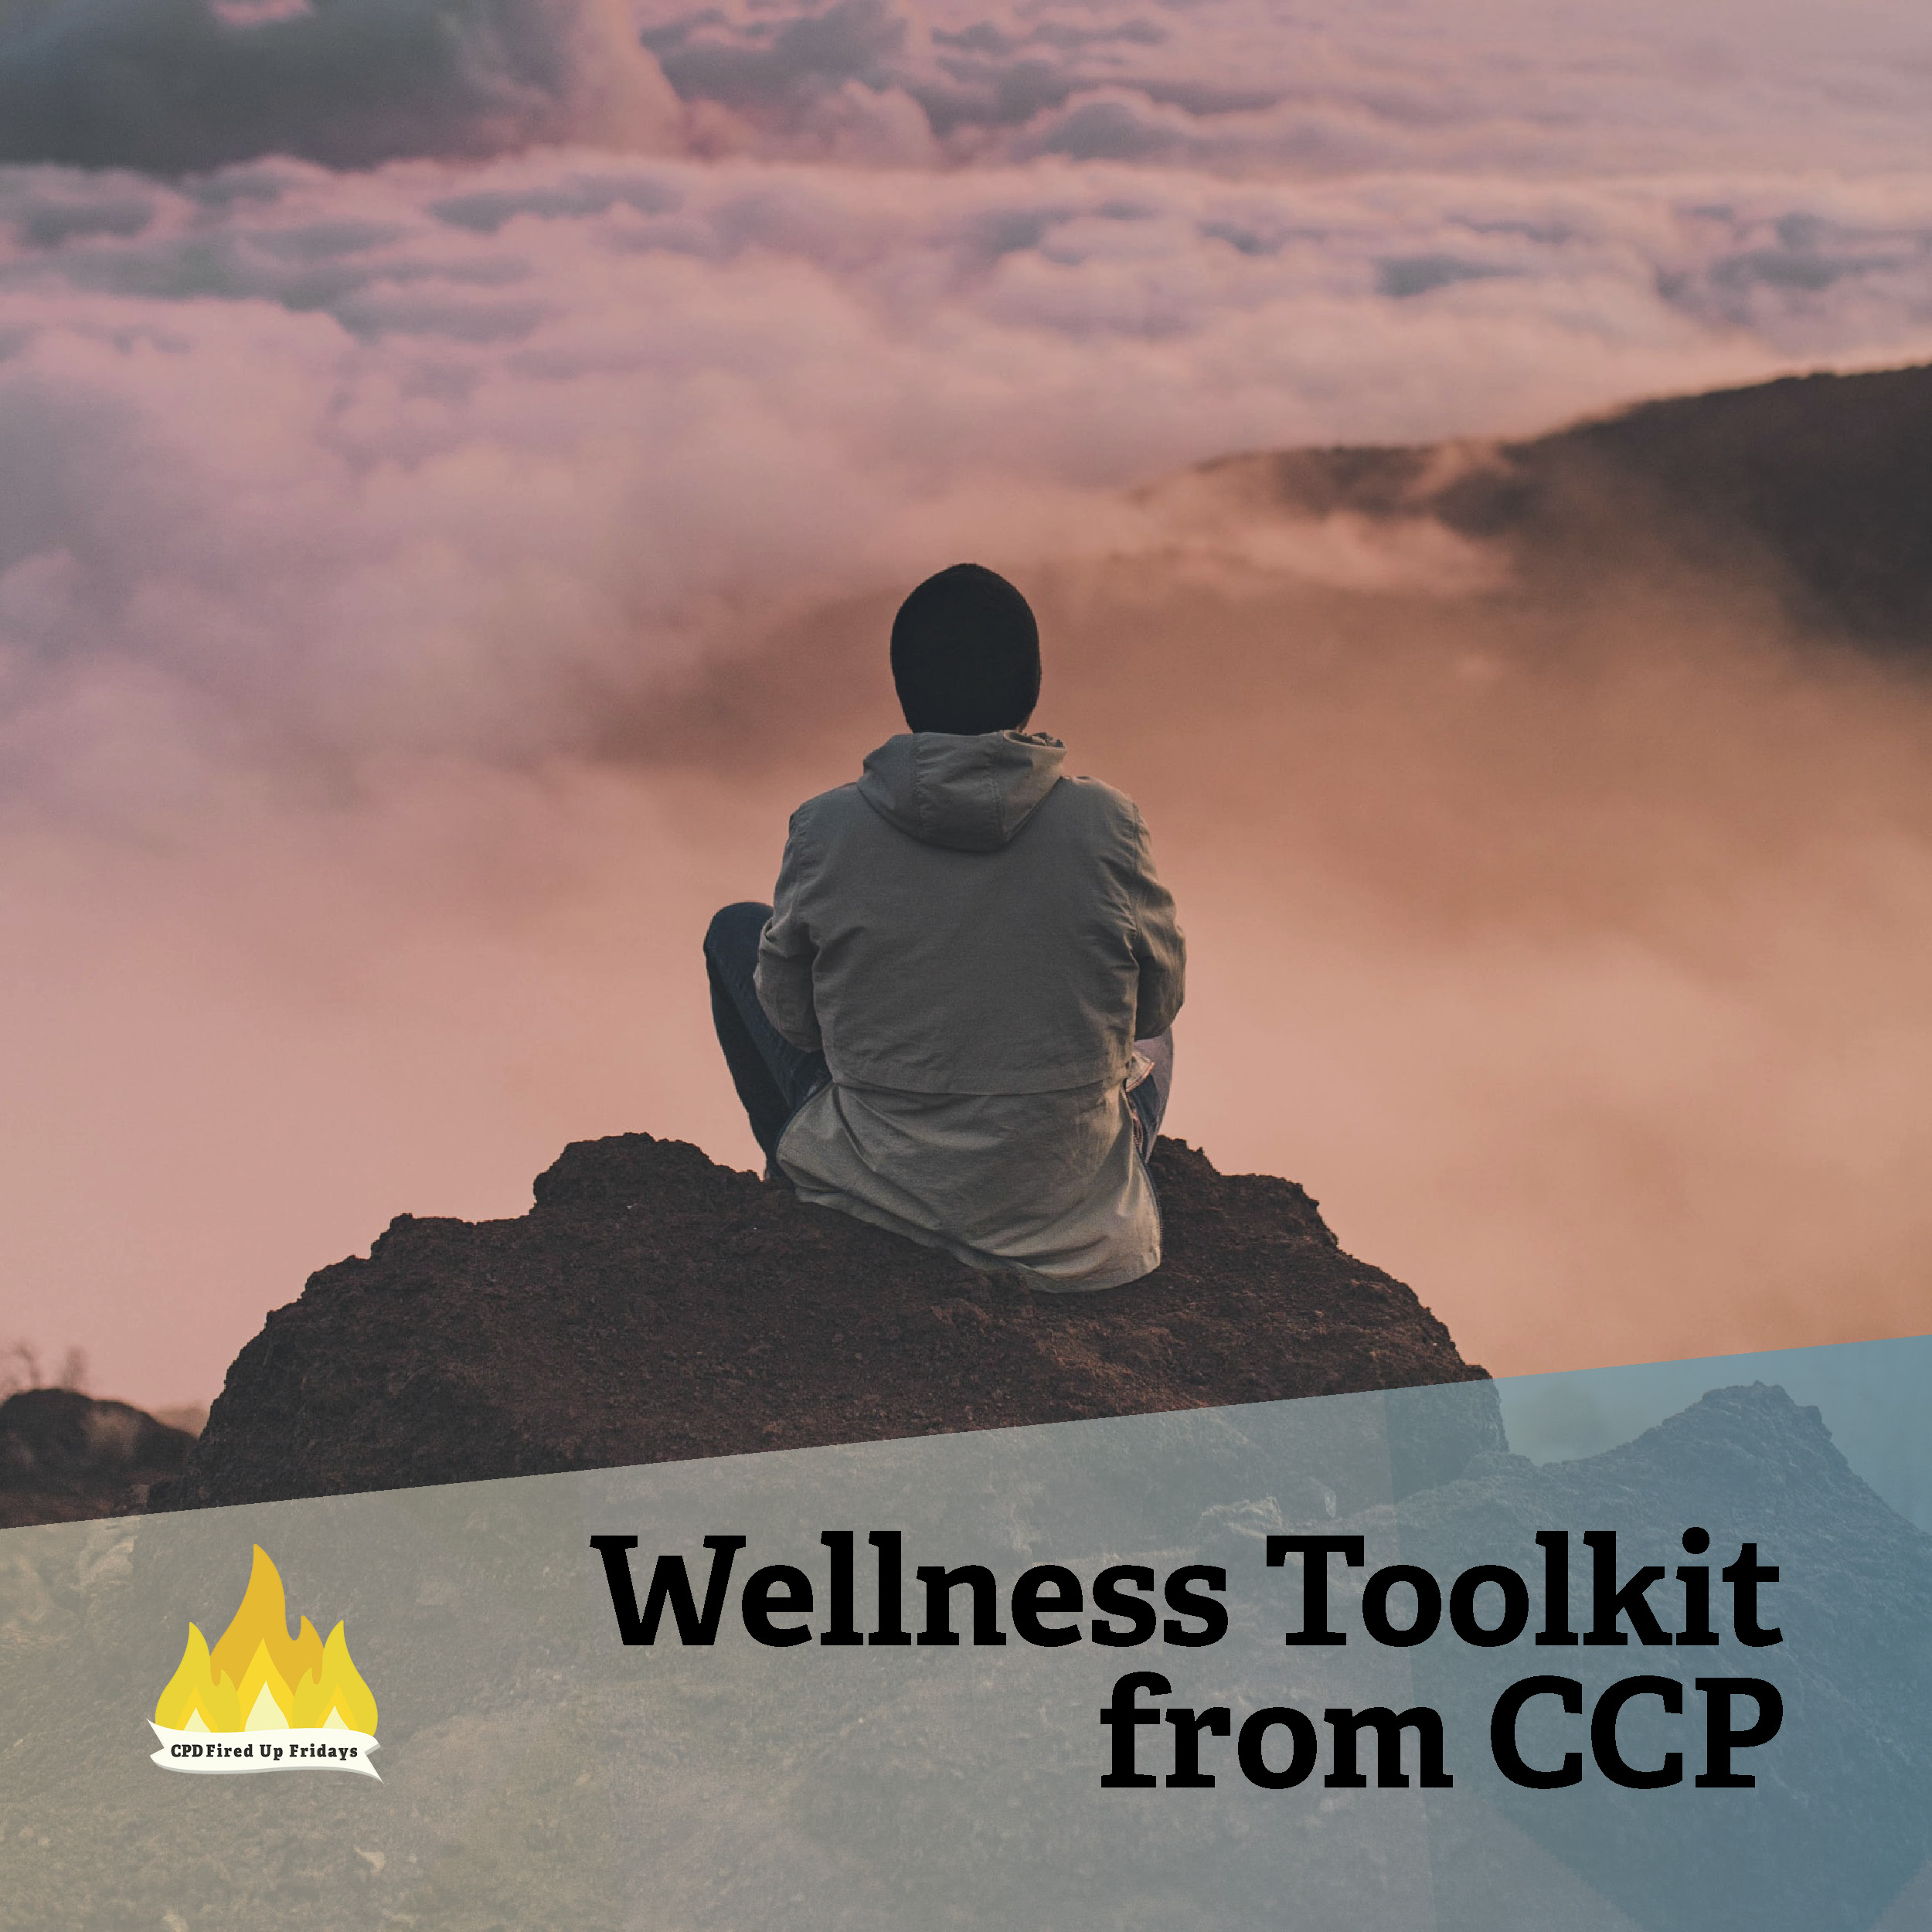 A person wearing a gray hooded sweater and a black knitted hat sits on a peak of rocks with his back facing the camera. In front of him, peaks of distant mountains just crest above waves of pink and orange tinted clouds. Underneath, text reads: 'Wellness Toolkit from CCP.'